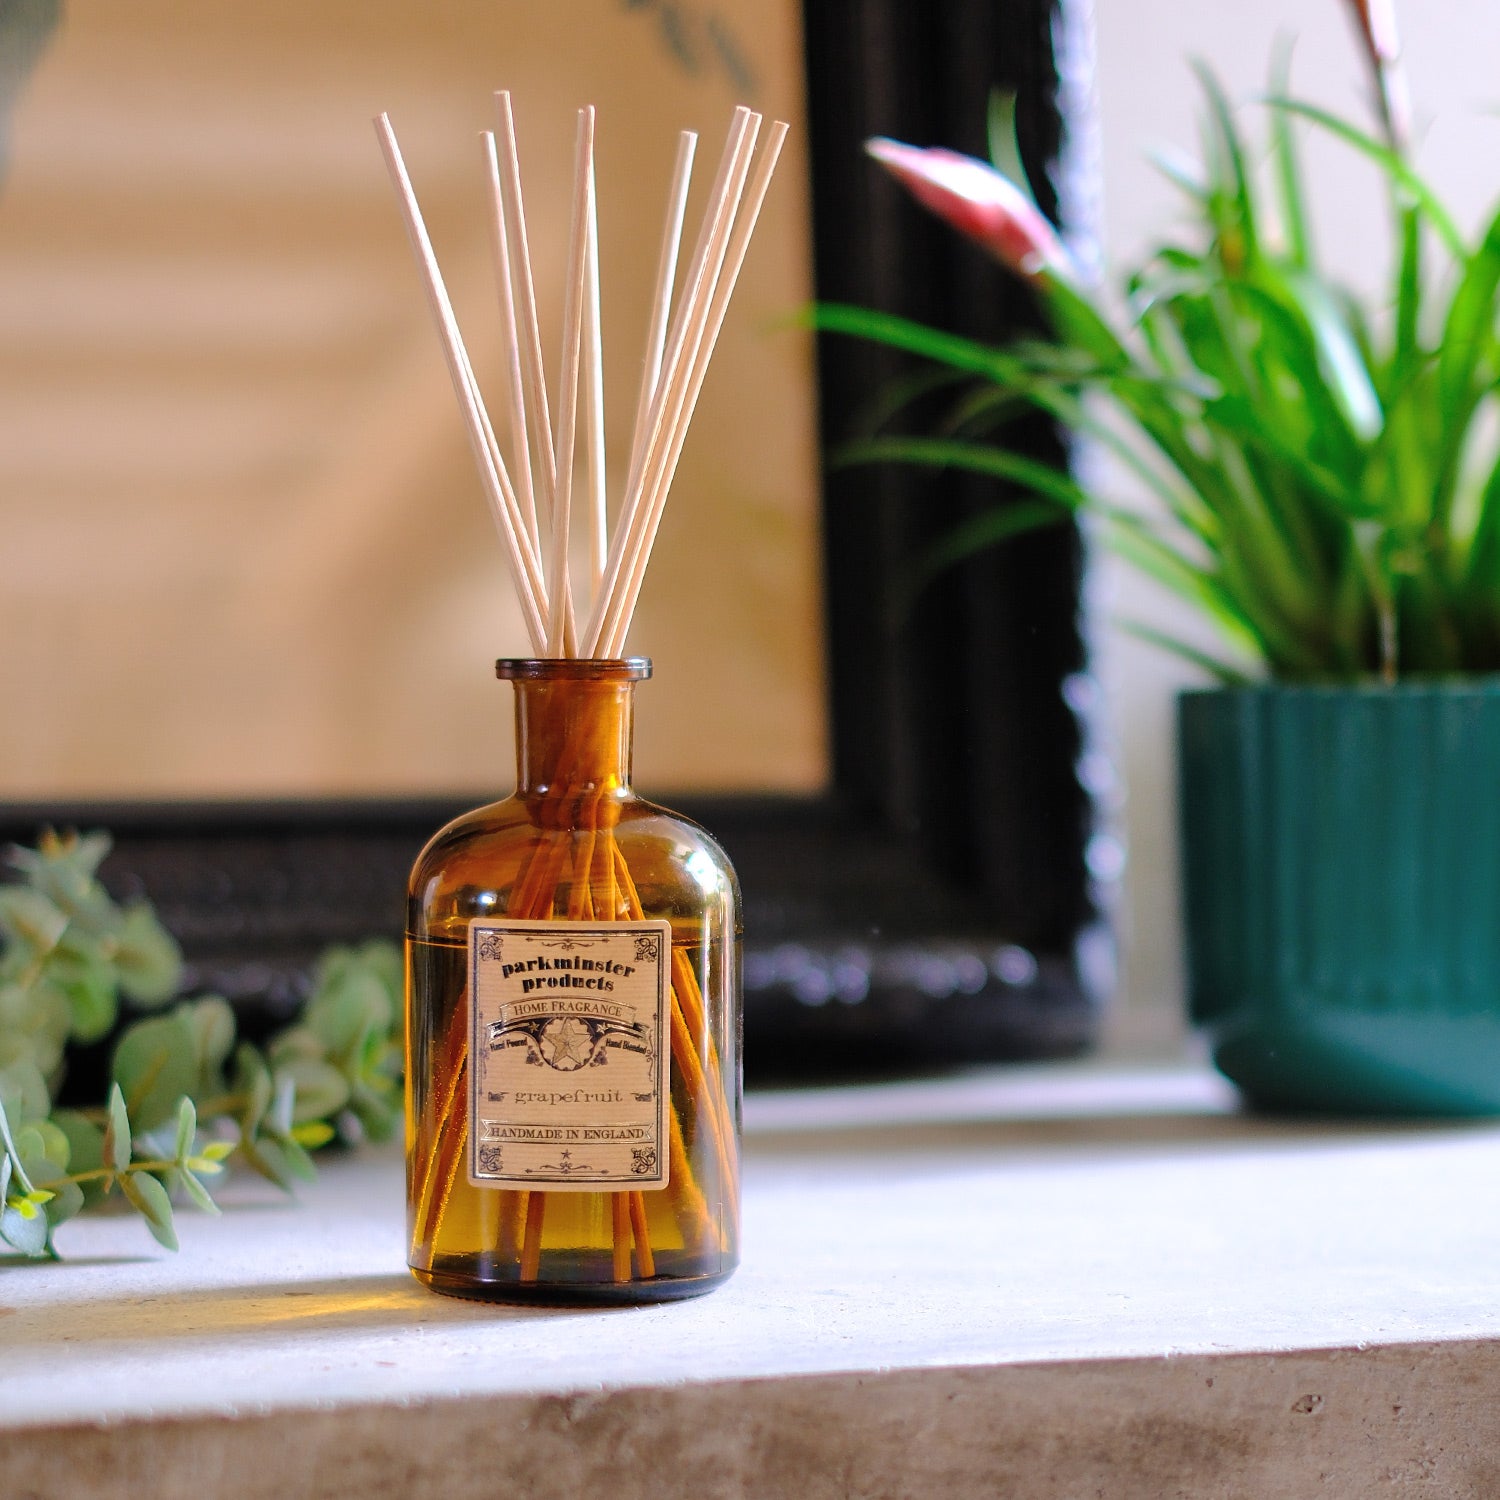 Experience the invigorating scent of the Grapefruit Reed Diffuser from Parkminster, 200ml 100% essential oil, part of the Apothecary Collection, made in Cornwall